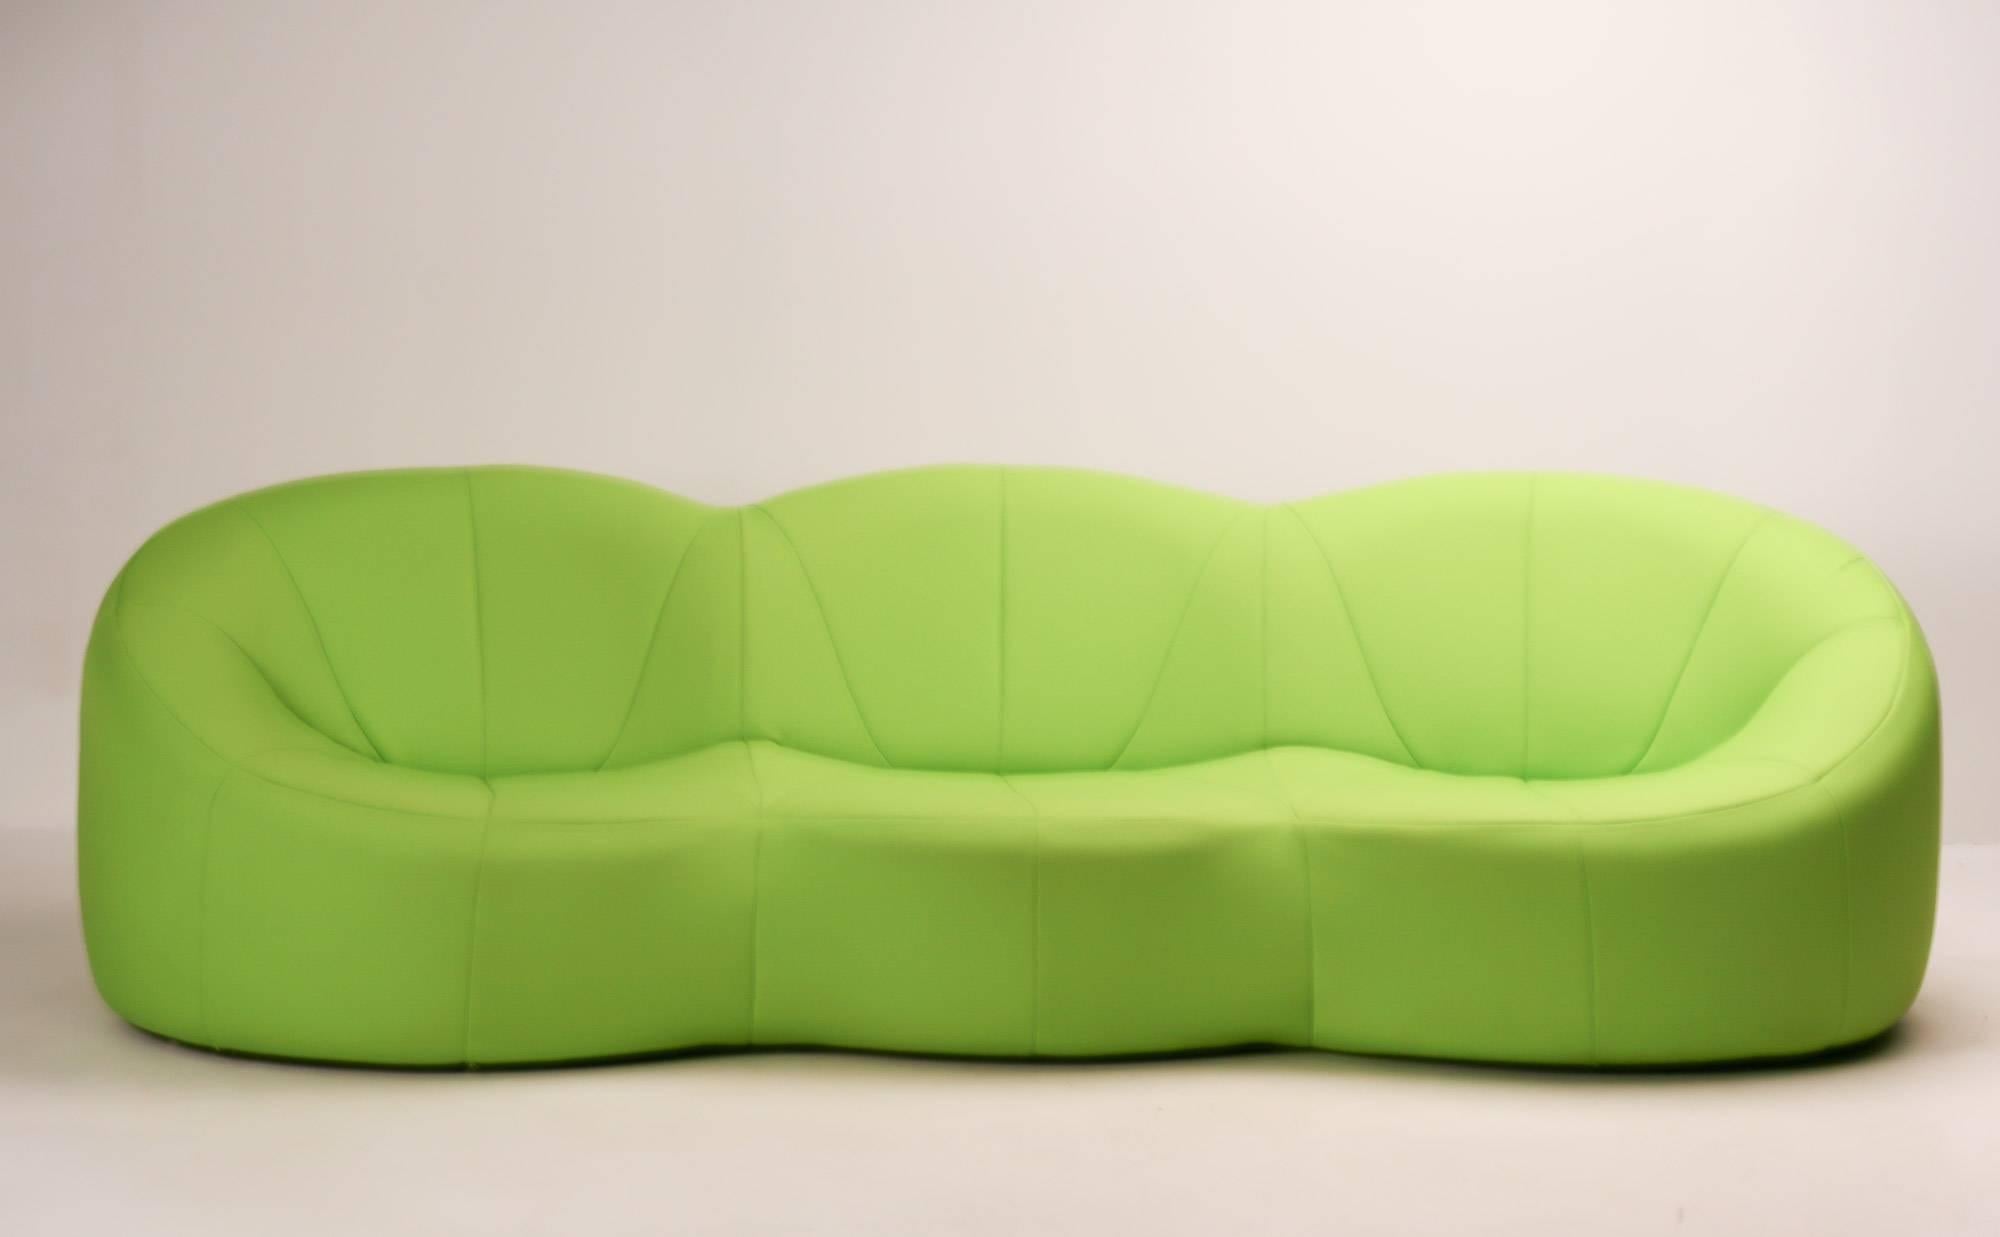 Apple green pumpkin three-seater sofa by Pierre Paulin for Ligne Roset France. Marked.

Pierre Paulin's 1971 design for seating for the private apartments of Claude & Georges Pompidou at the Elysée Palace. This is a later production by Ligne